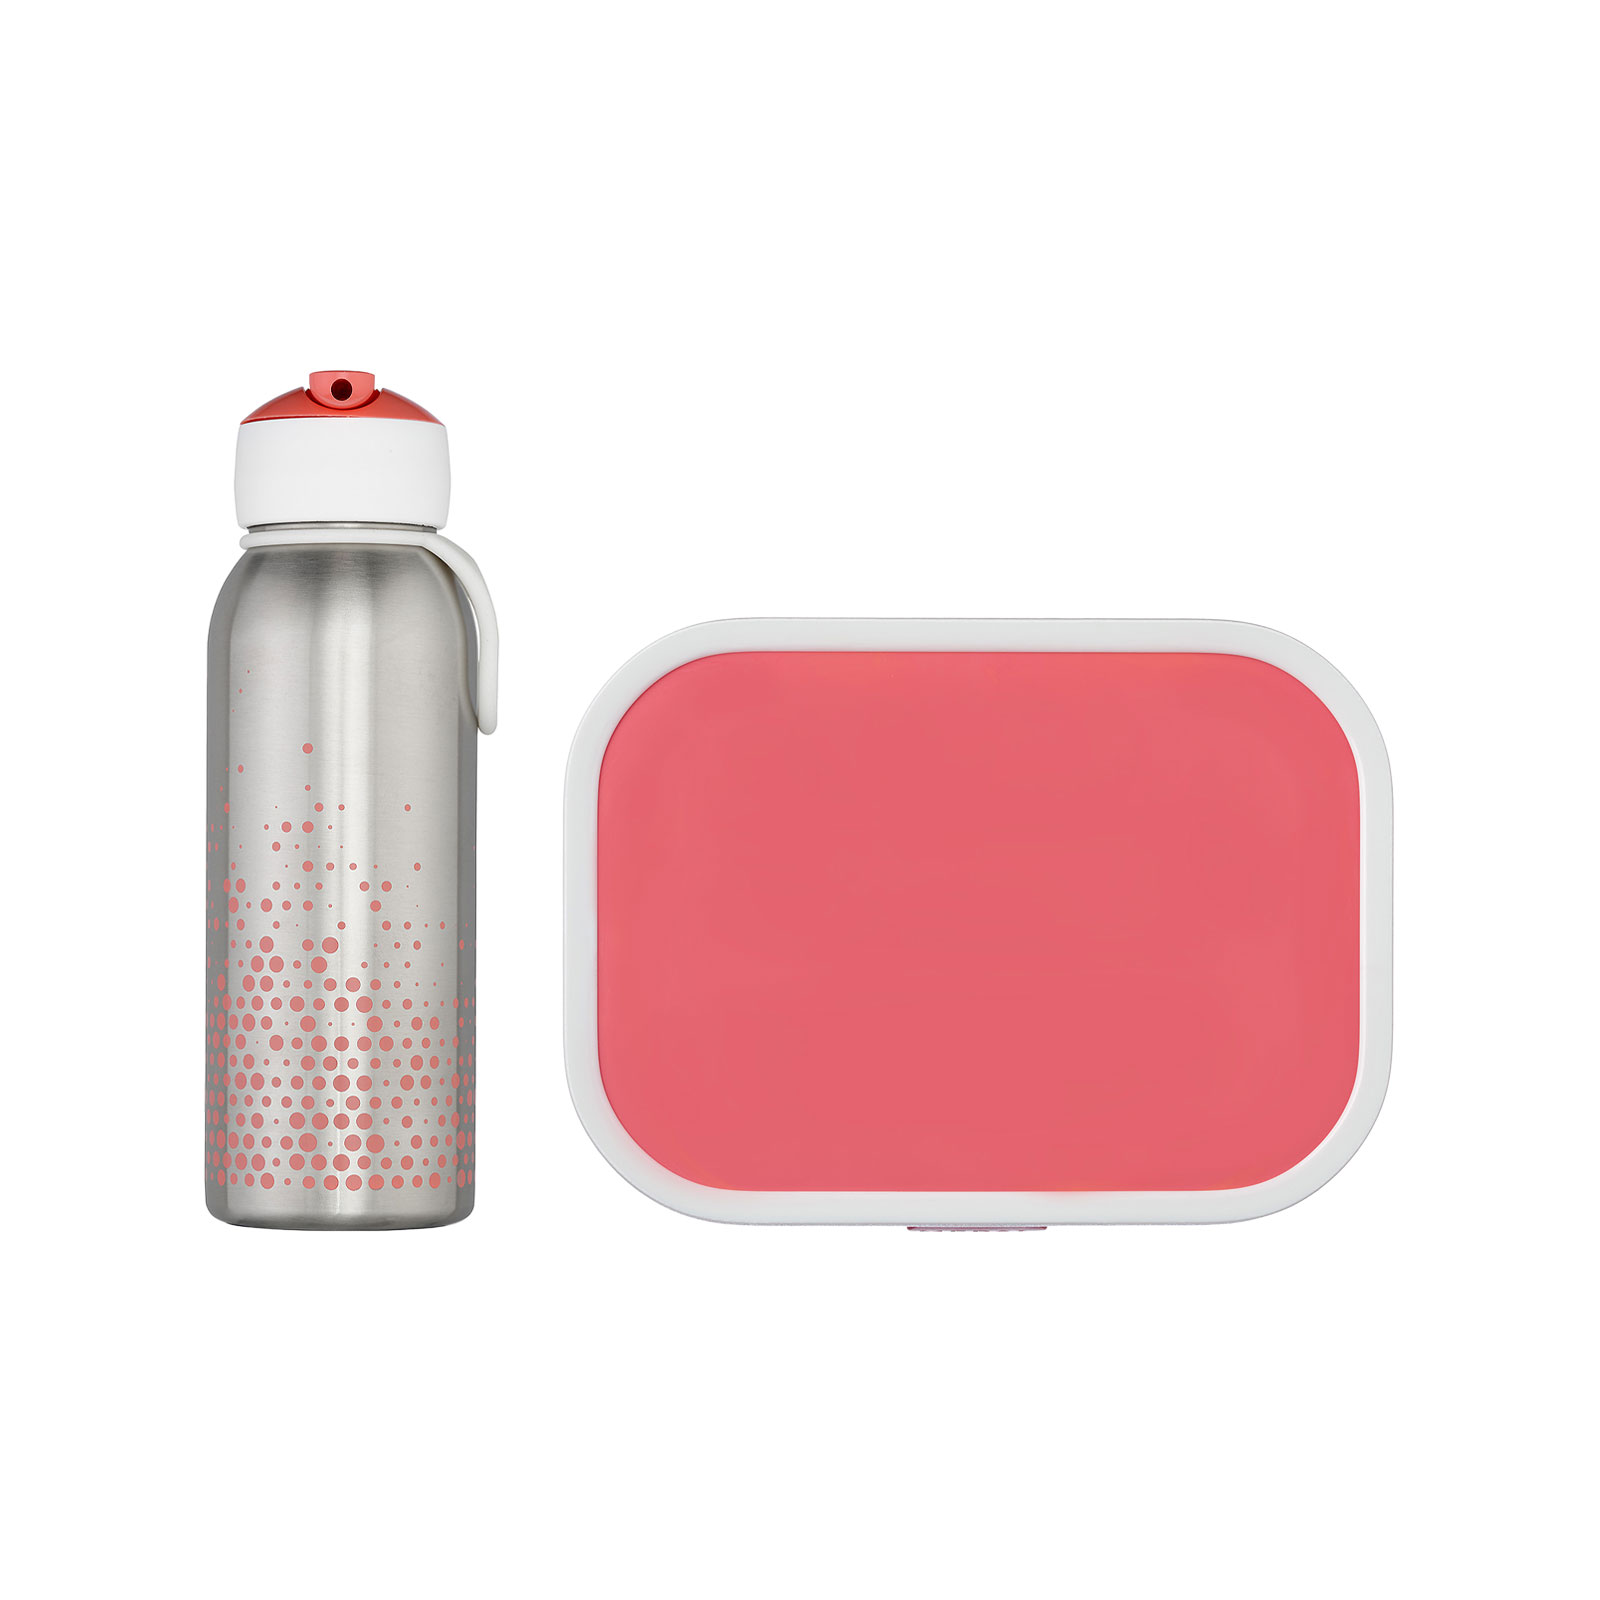 Mepal CAMPUS Lunchset mit Thermoflasche pink 2-teilig - A 